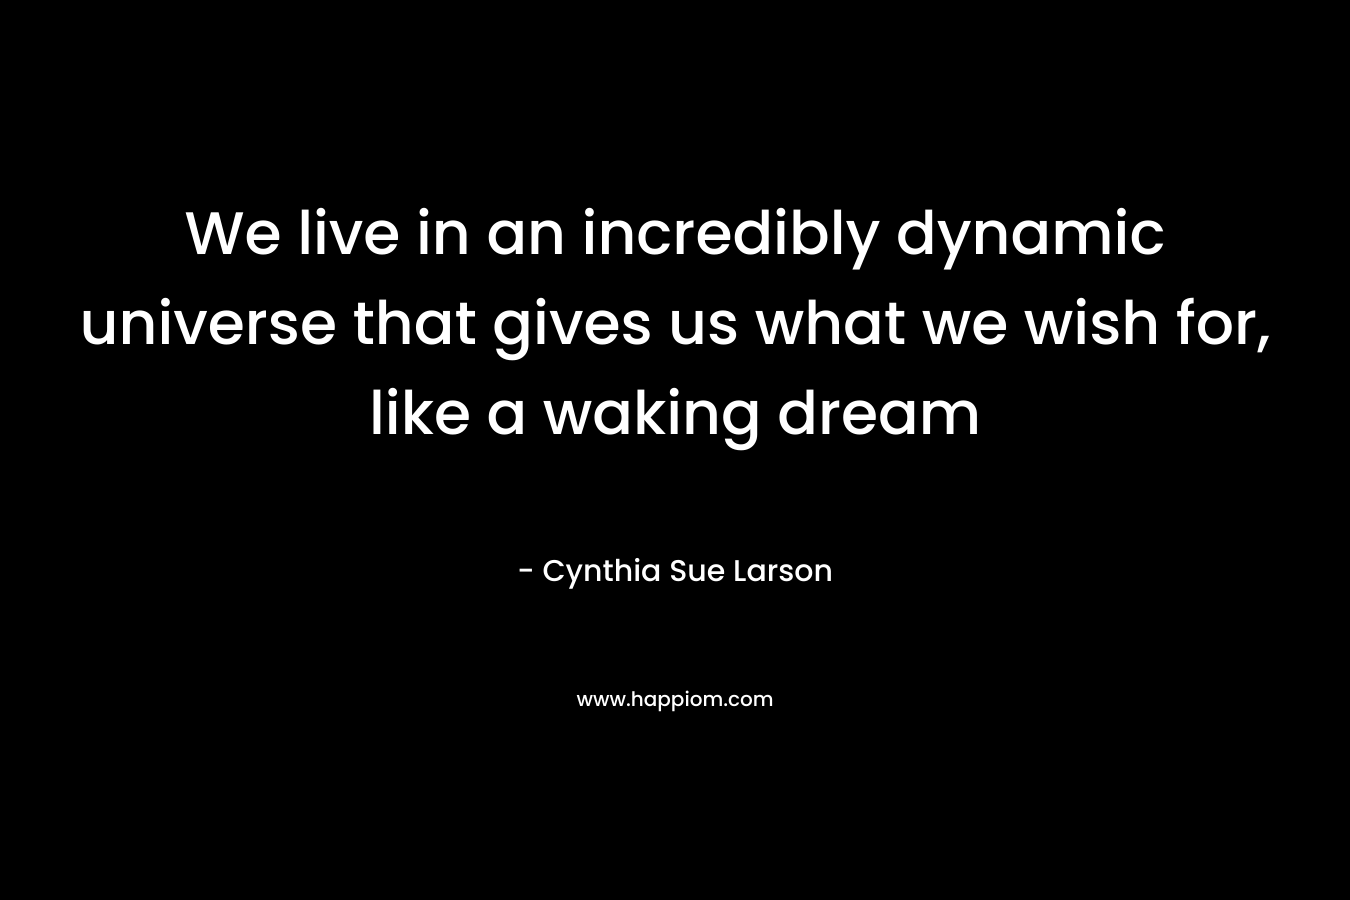 We live in an incredibly dynamic universe that gives us what we wish for, like a waking dream